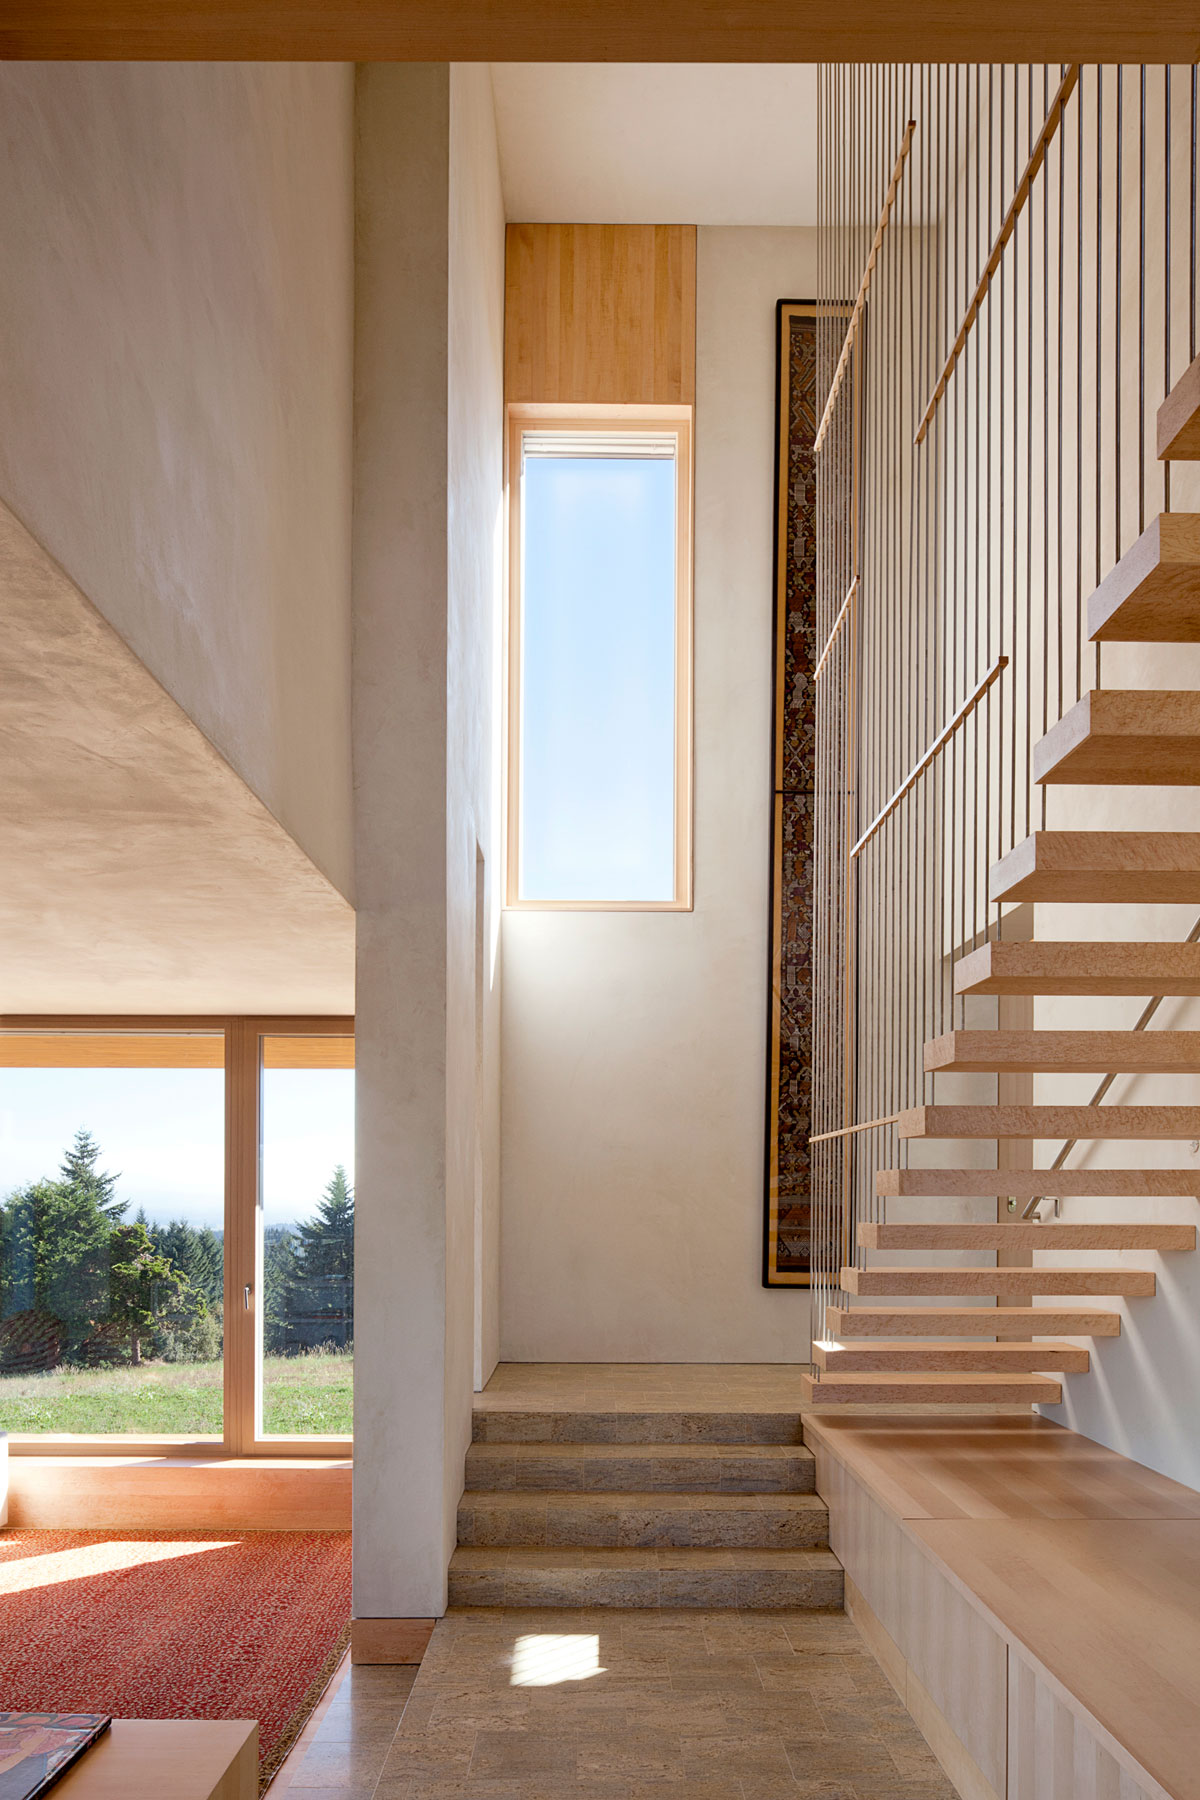 Stairwell of new home, Karuna House, designed by Holst Architecture and built by home builder Hammer & Hand